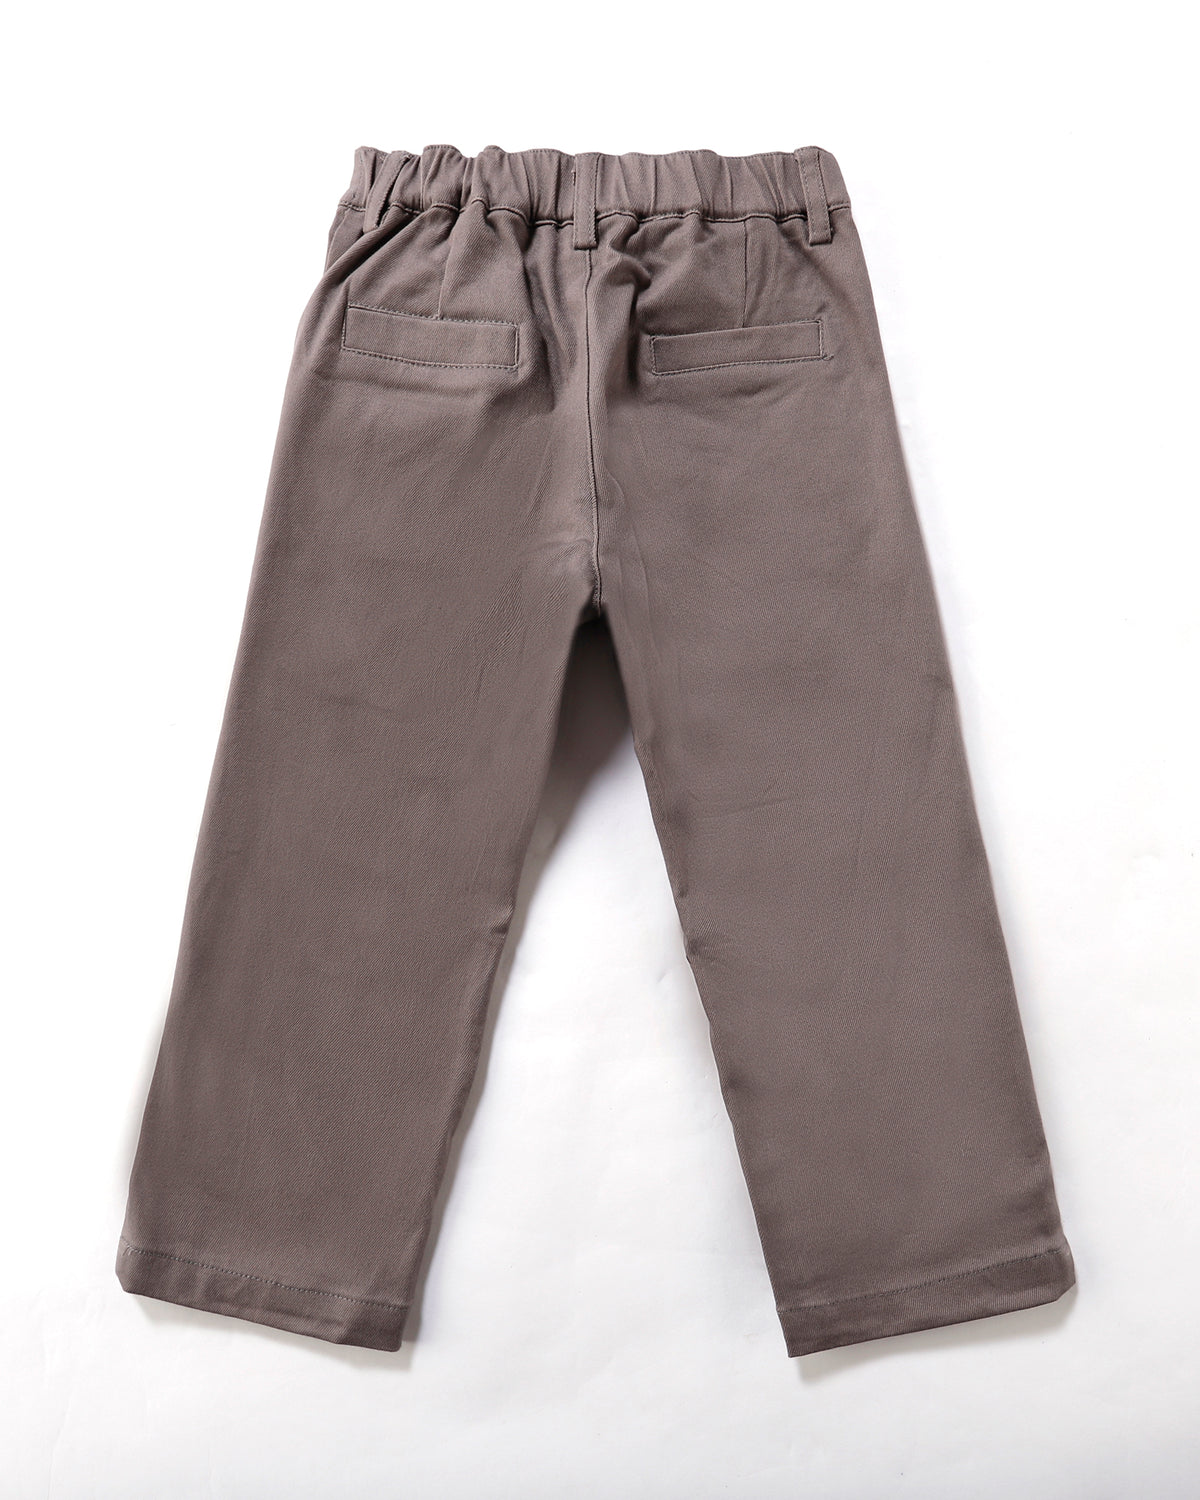 Signature Chino in Steel Back